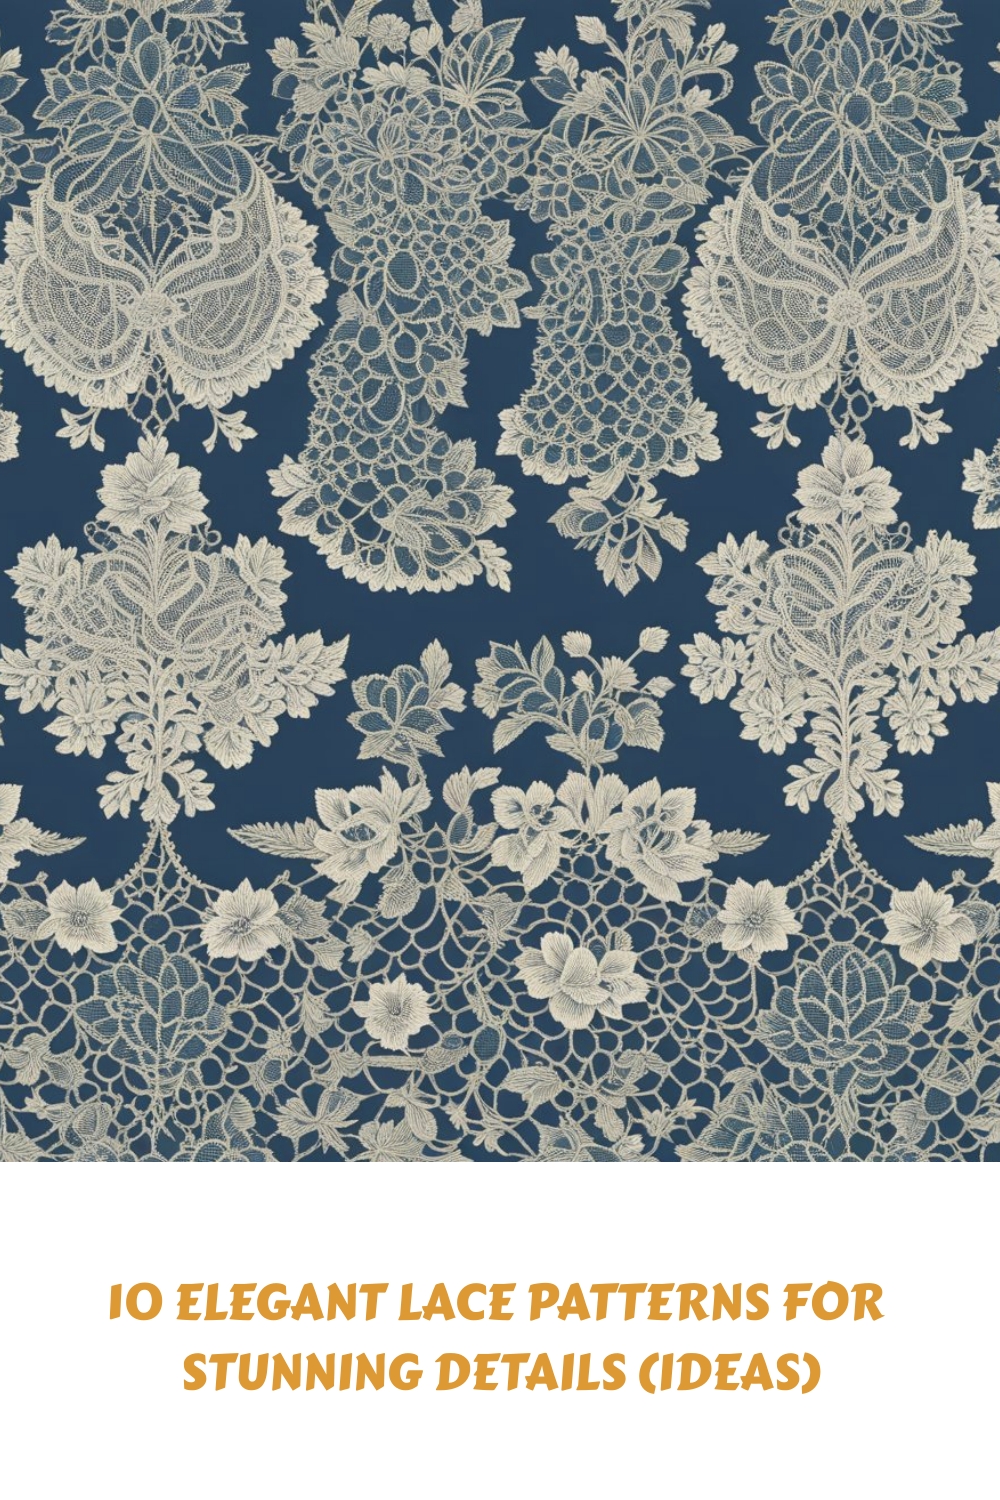 10 Elegant Lace Patterns for Stunning Details Ideas generated pin 159657